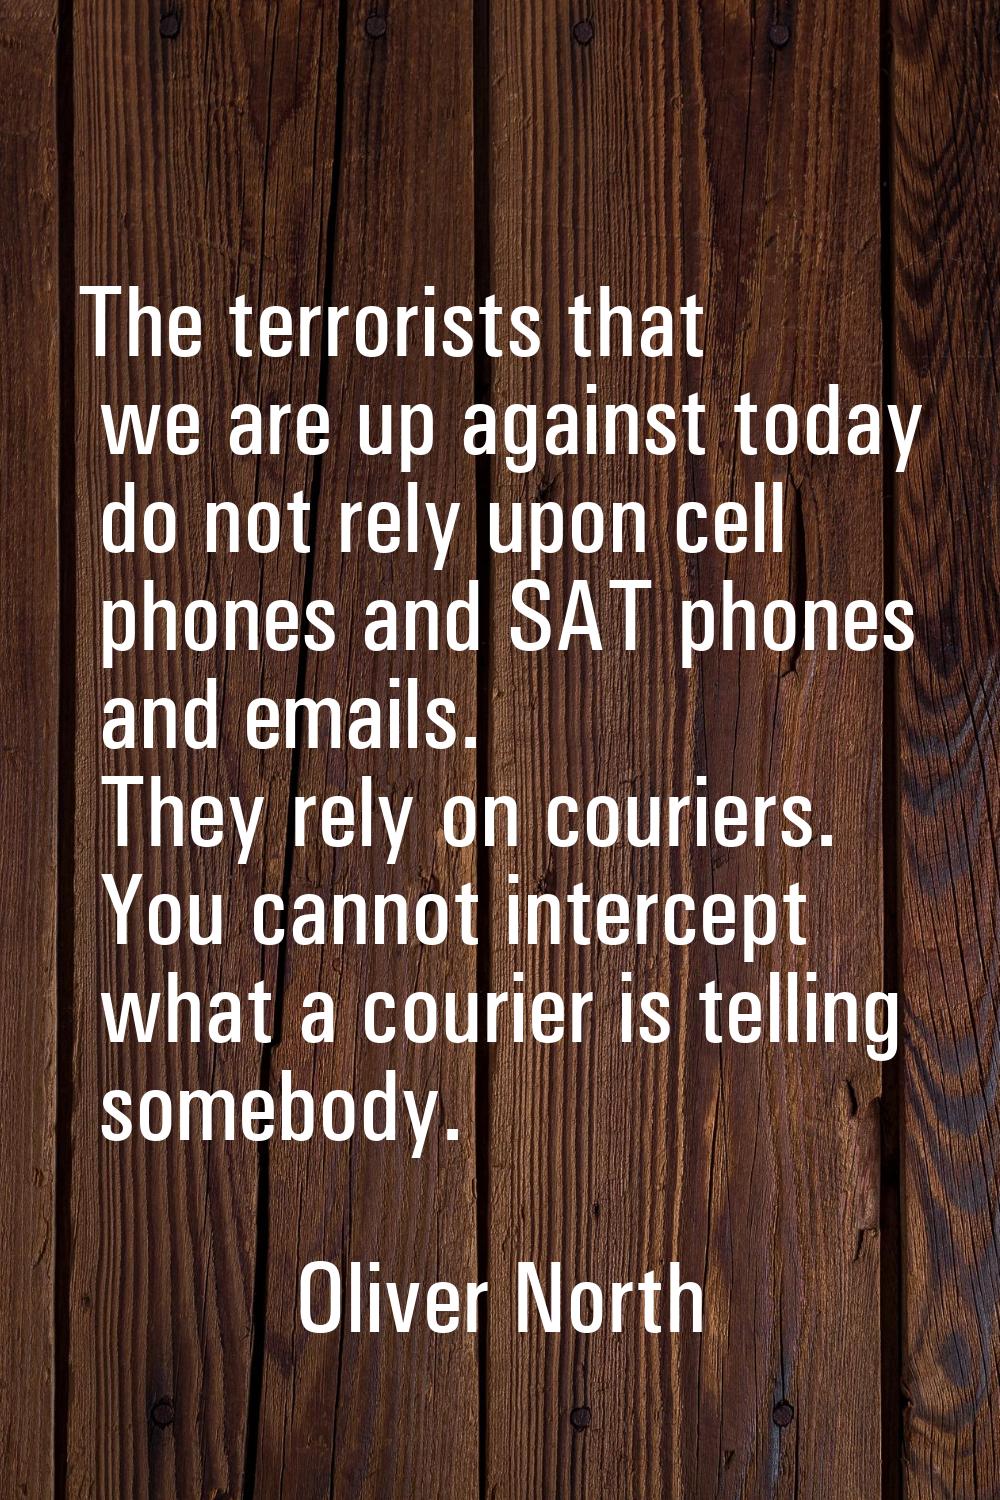 The terrorists that we are up against today do not rely upon cell phones and SAT phones and emails.